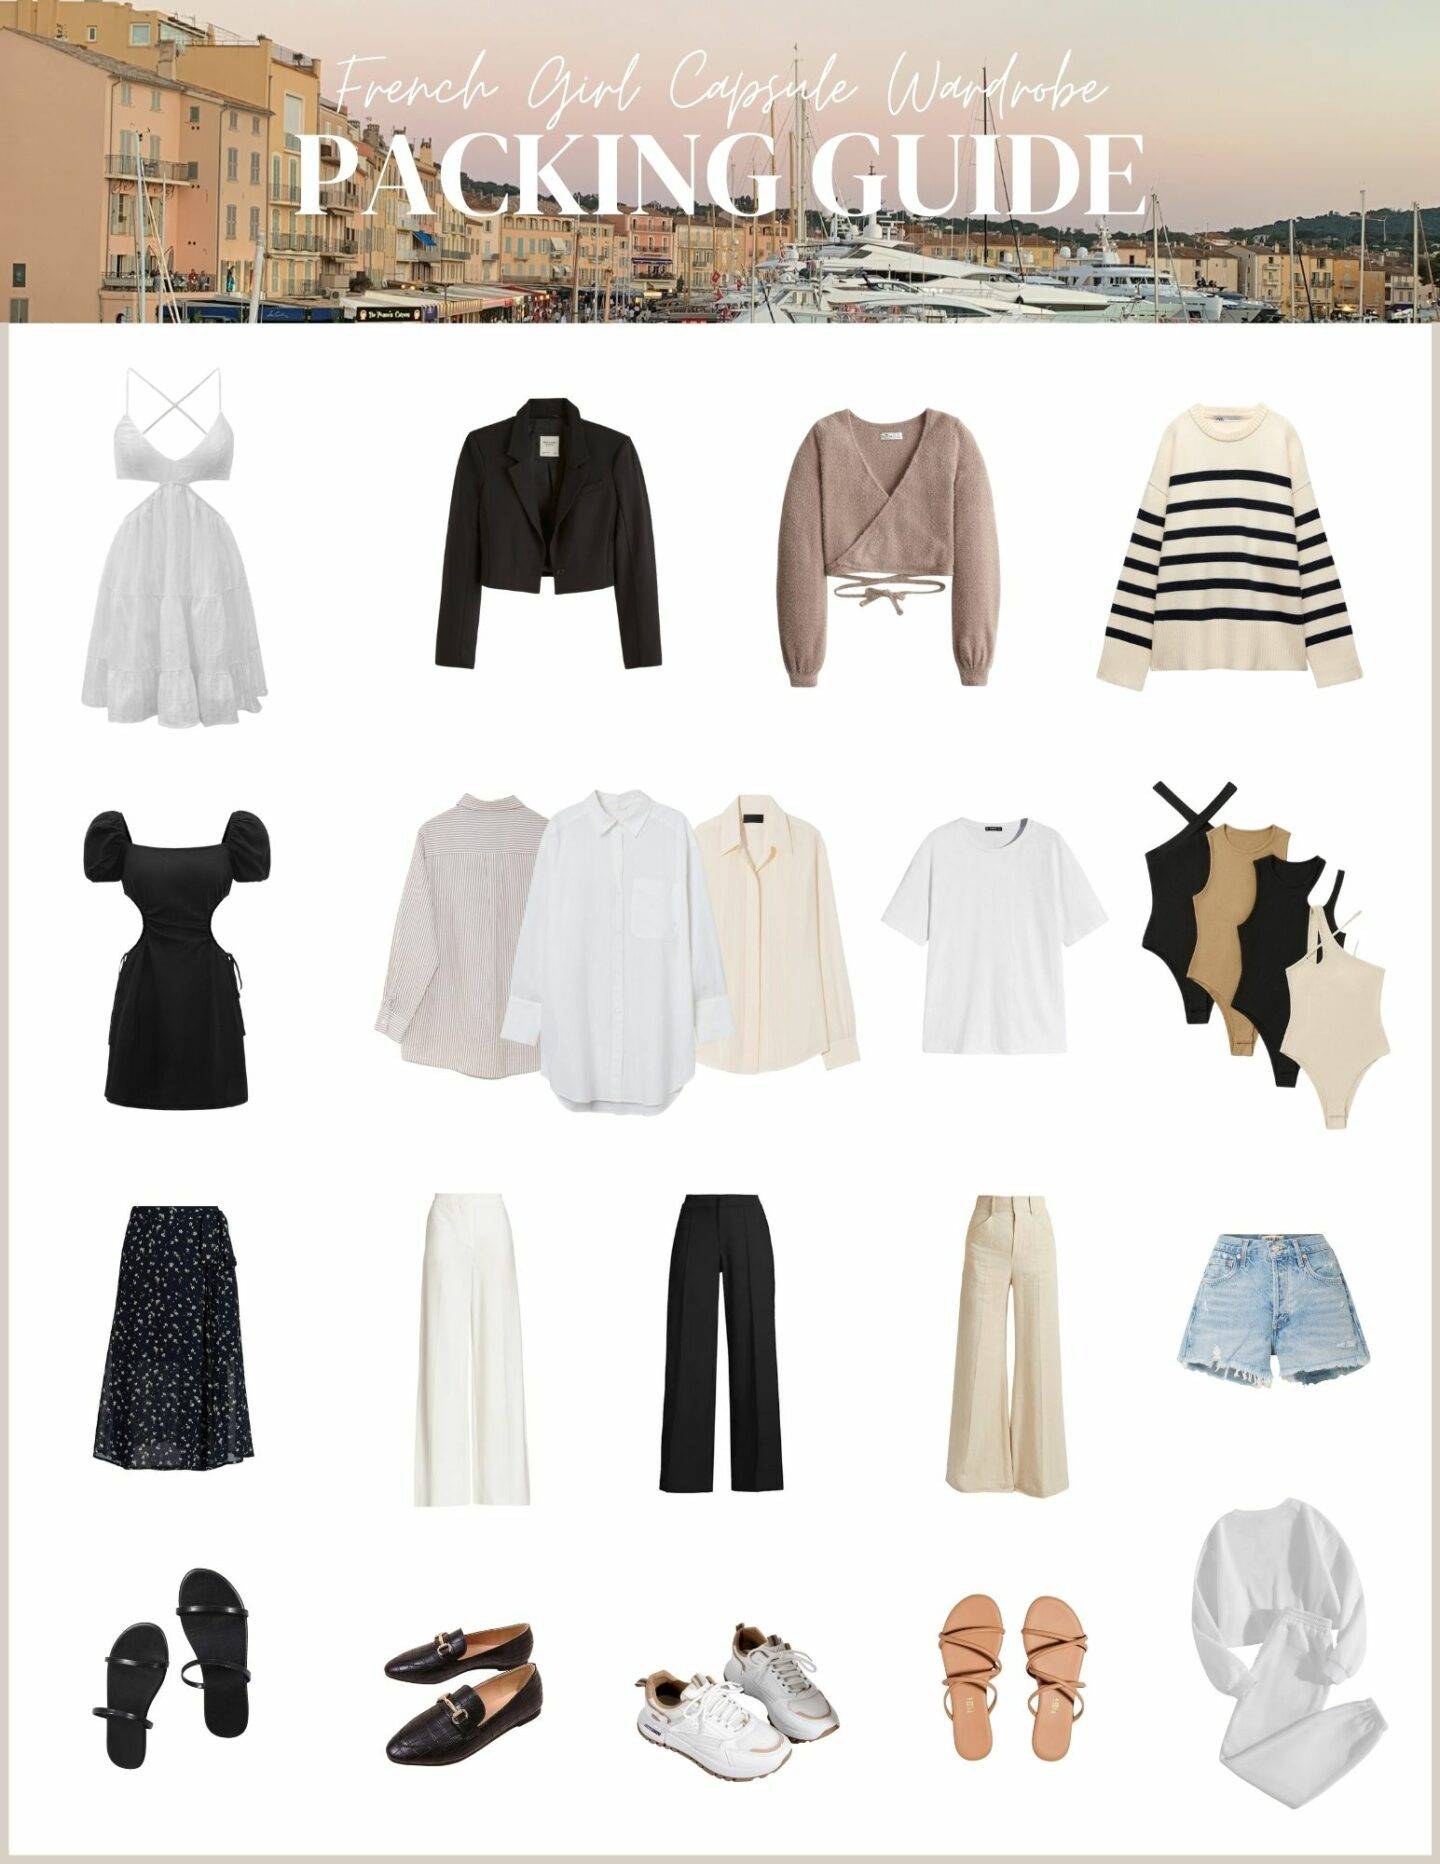 French Girl Capsule Wardrobe: Summer Vacation Packing Guide – My